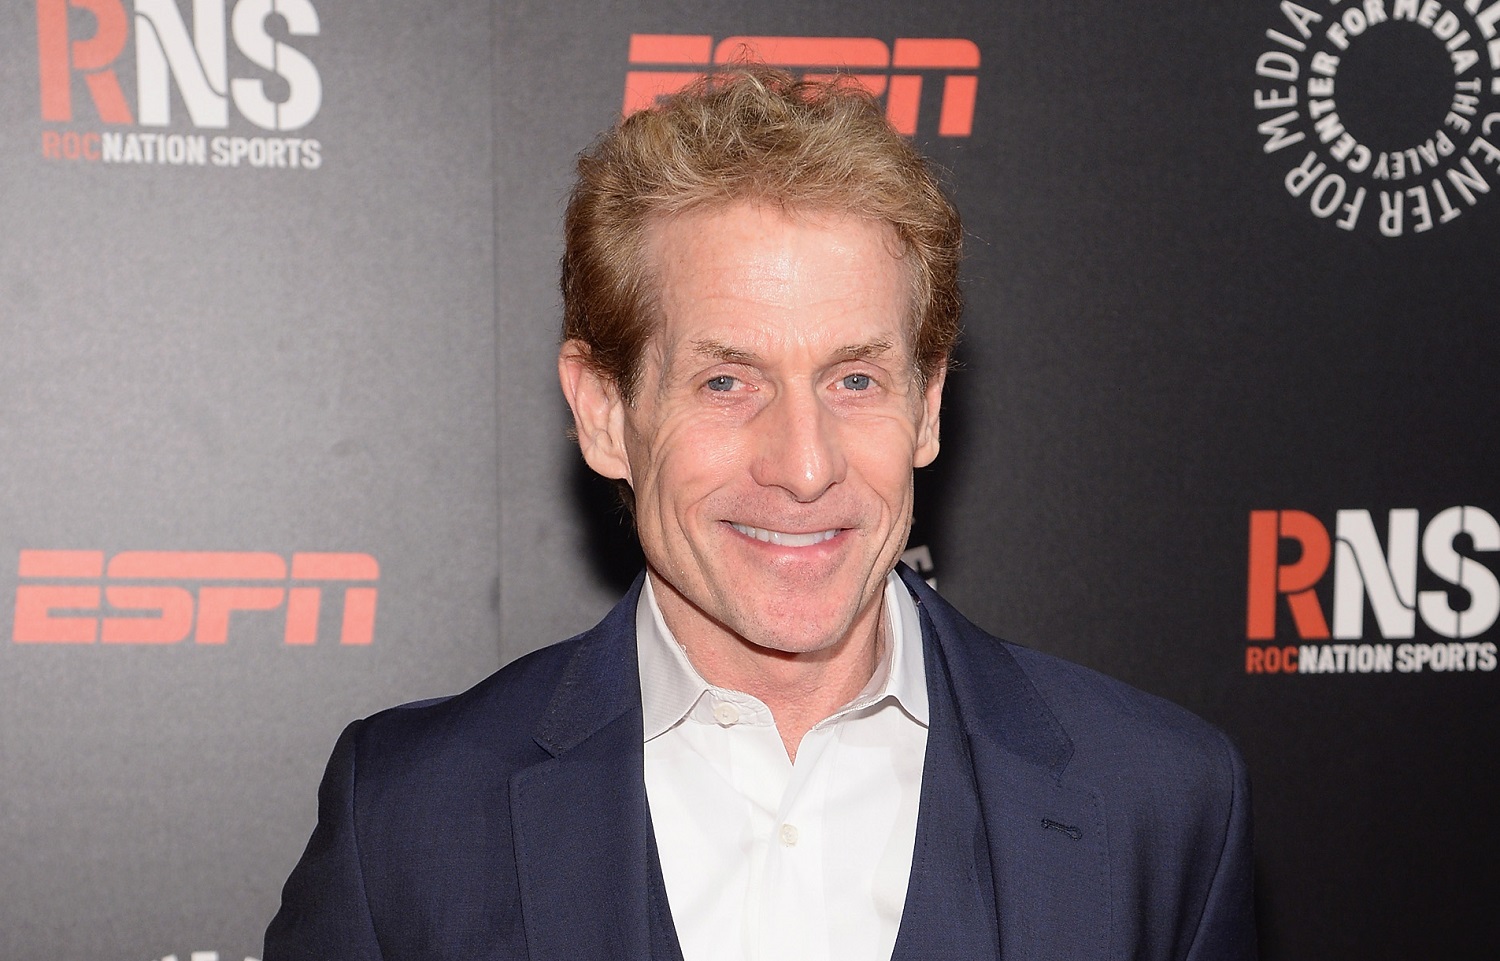 The New York Post has reported the details of the new contract bwteen Skip Bayless and Fox Sports.